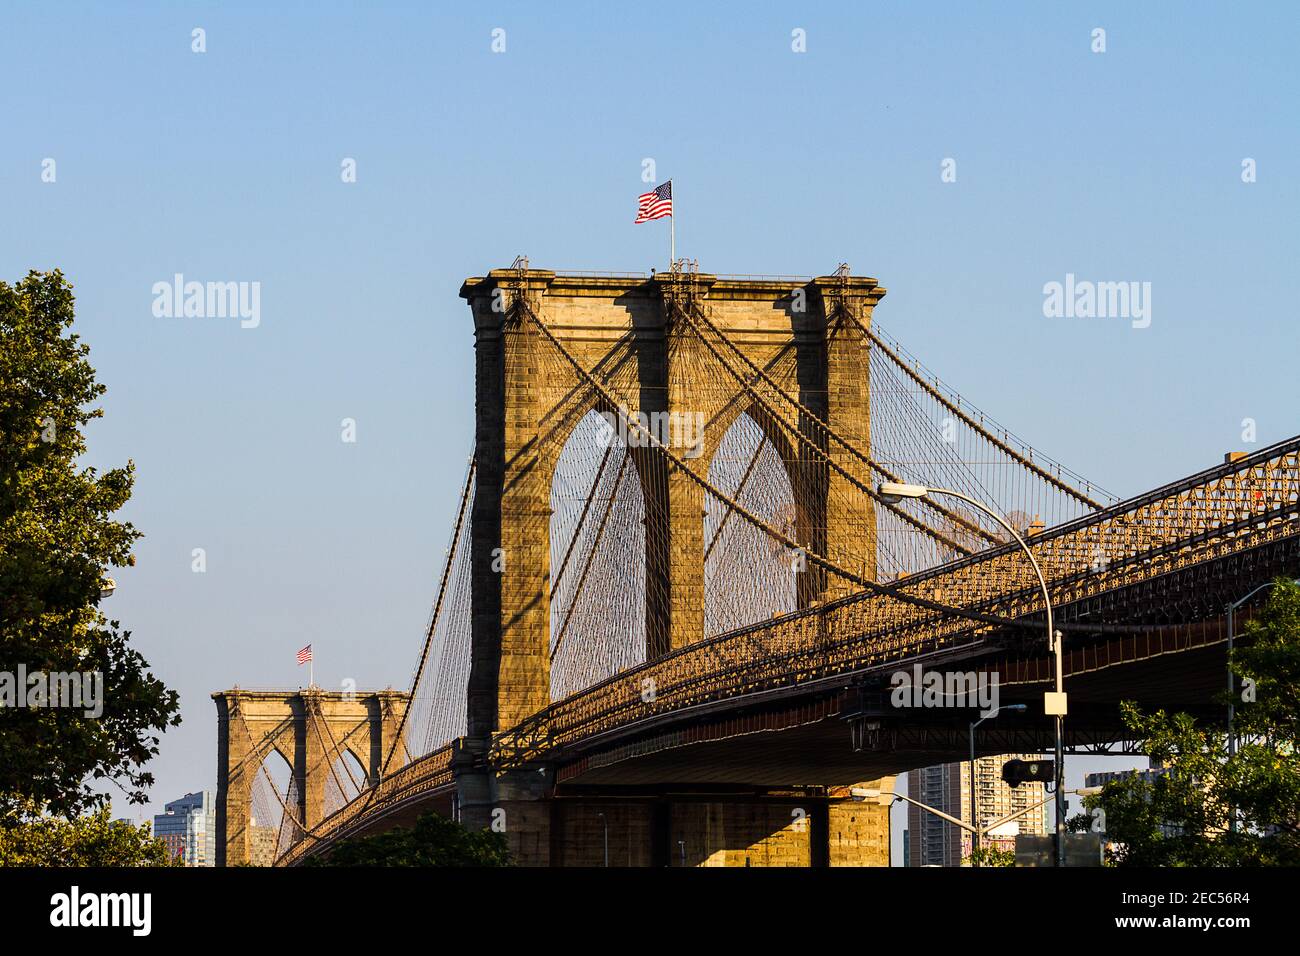 A close-up of the Brooklyn Bridge with the American flag on the top seen from Frankfort Street in Manhattan Stock Photo